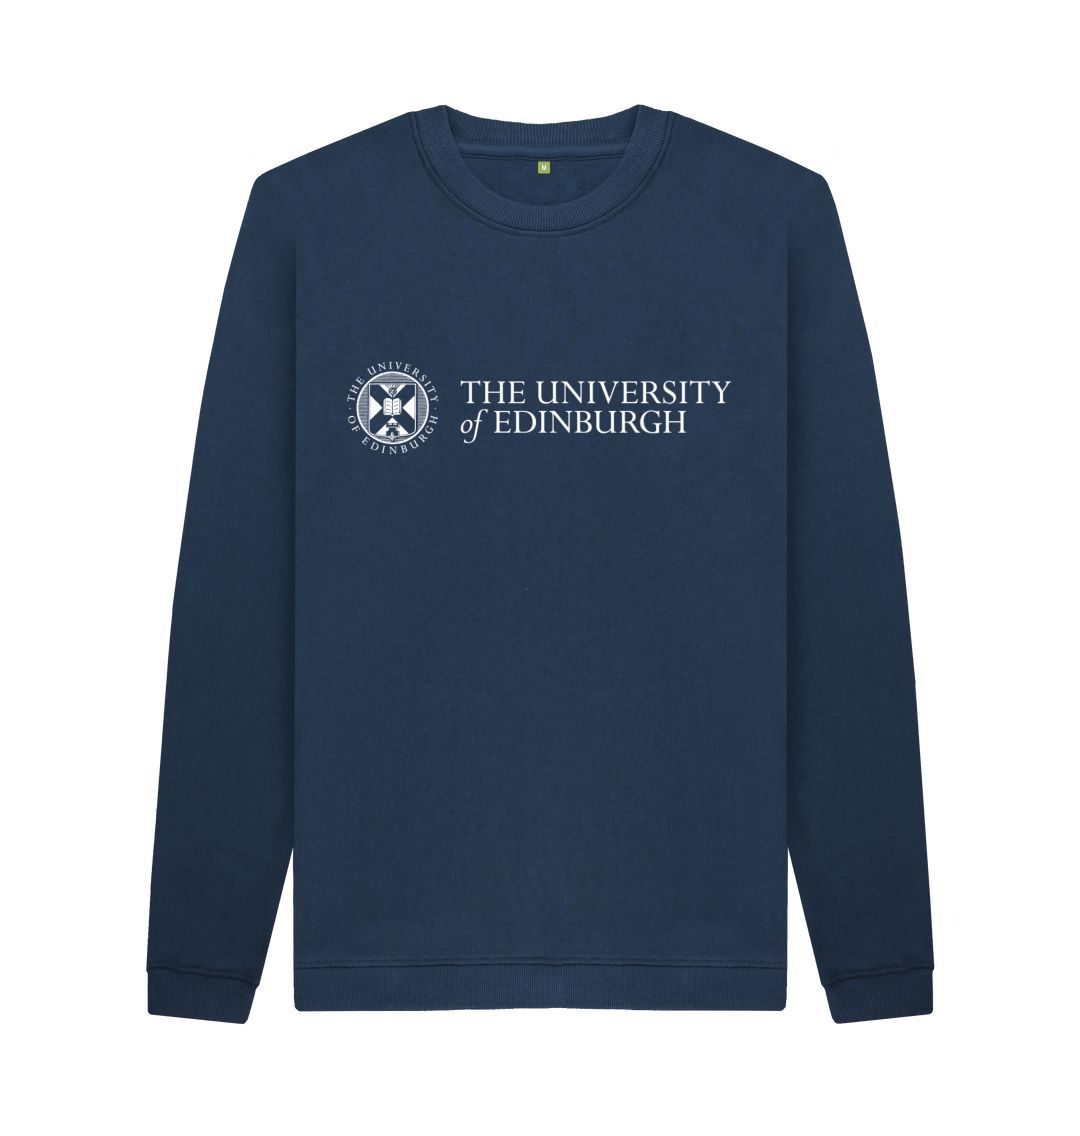 A navy blue sweatshirt with the University logo printed across the chest in white